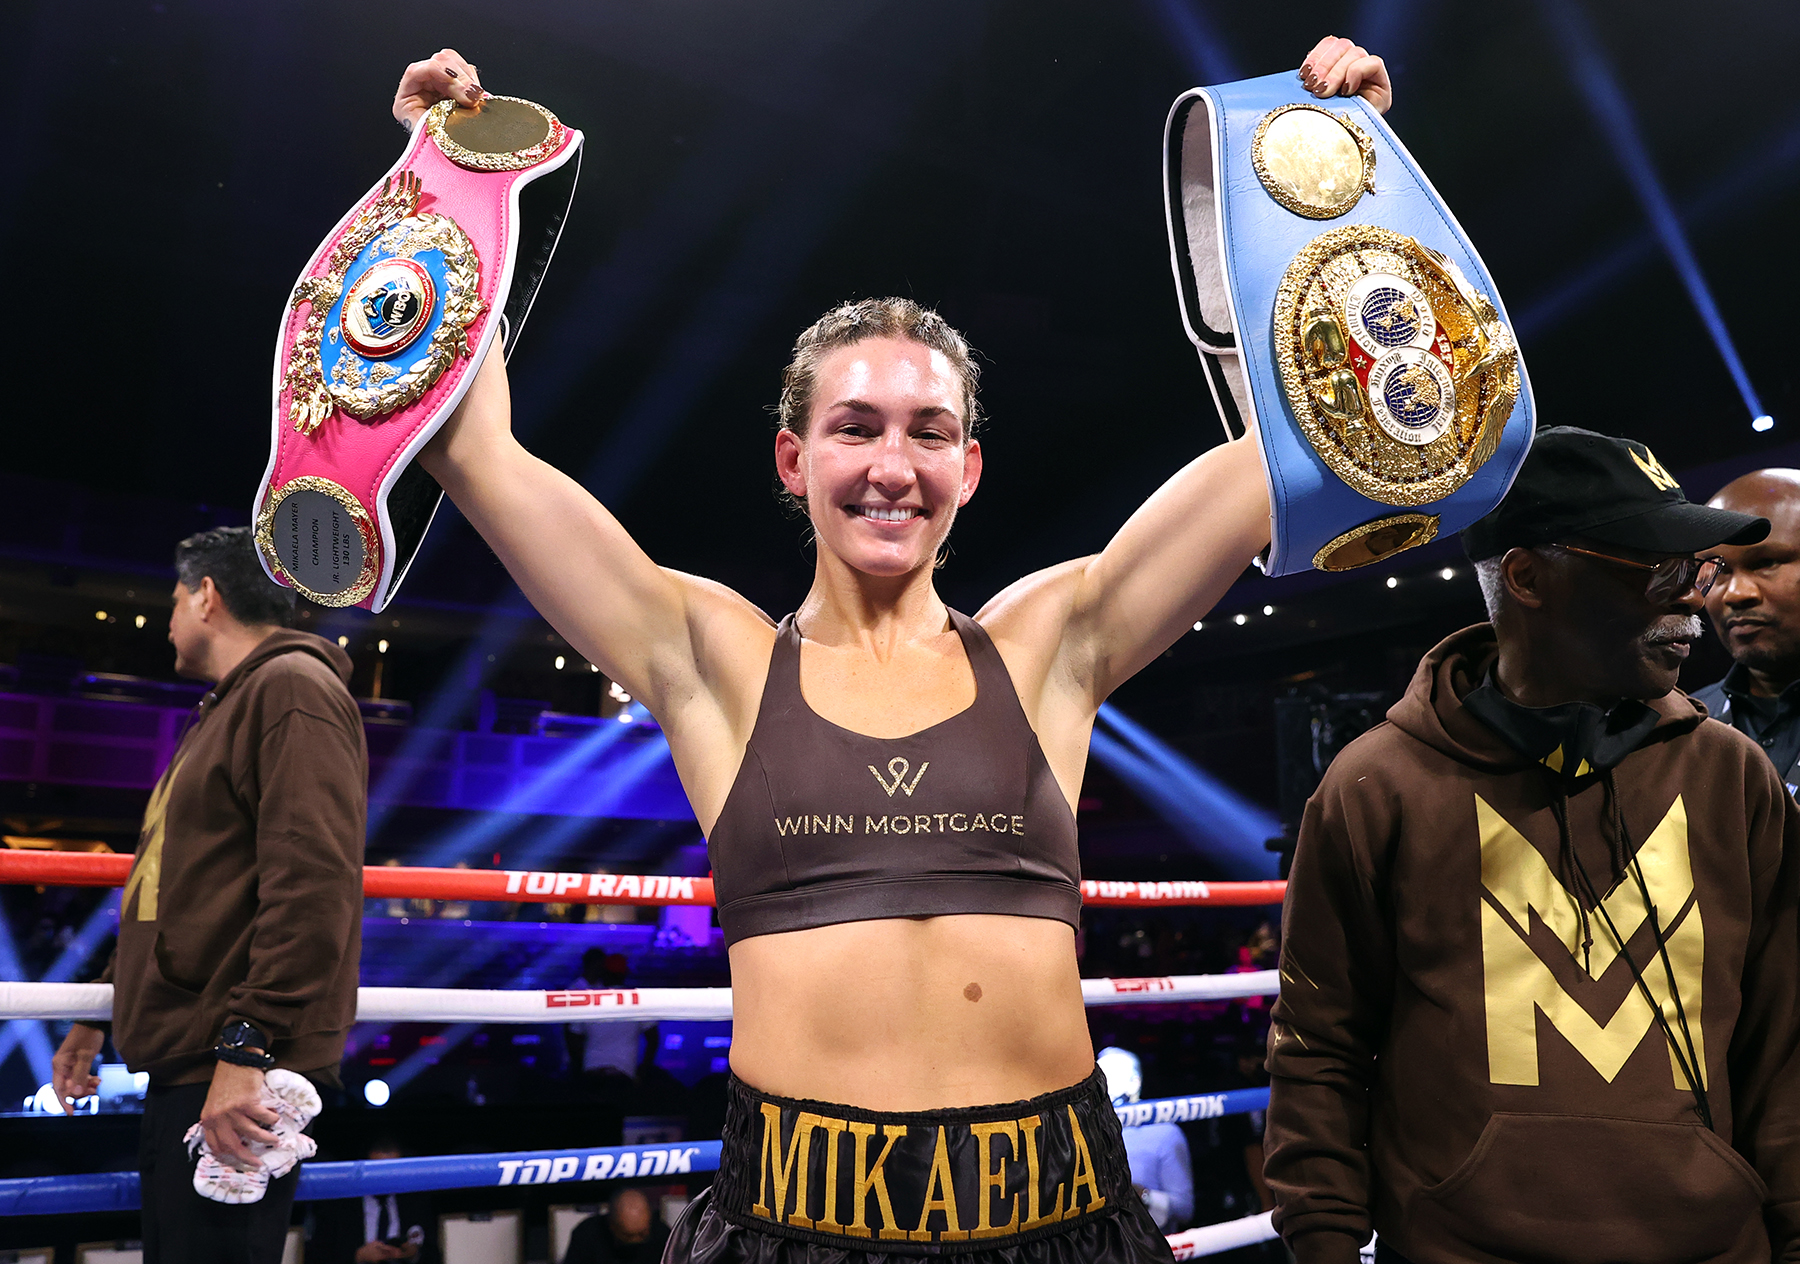 Mikaela Mayer has unified the WBO super-featherweight